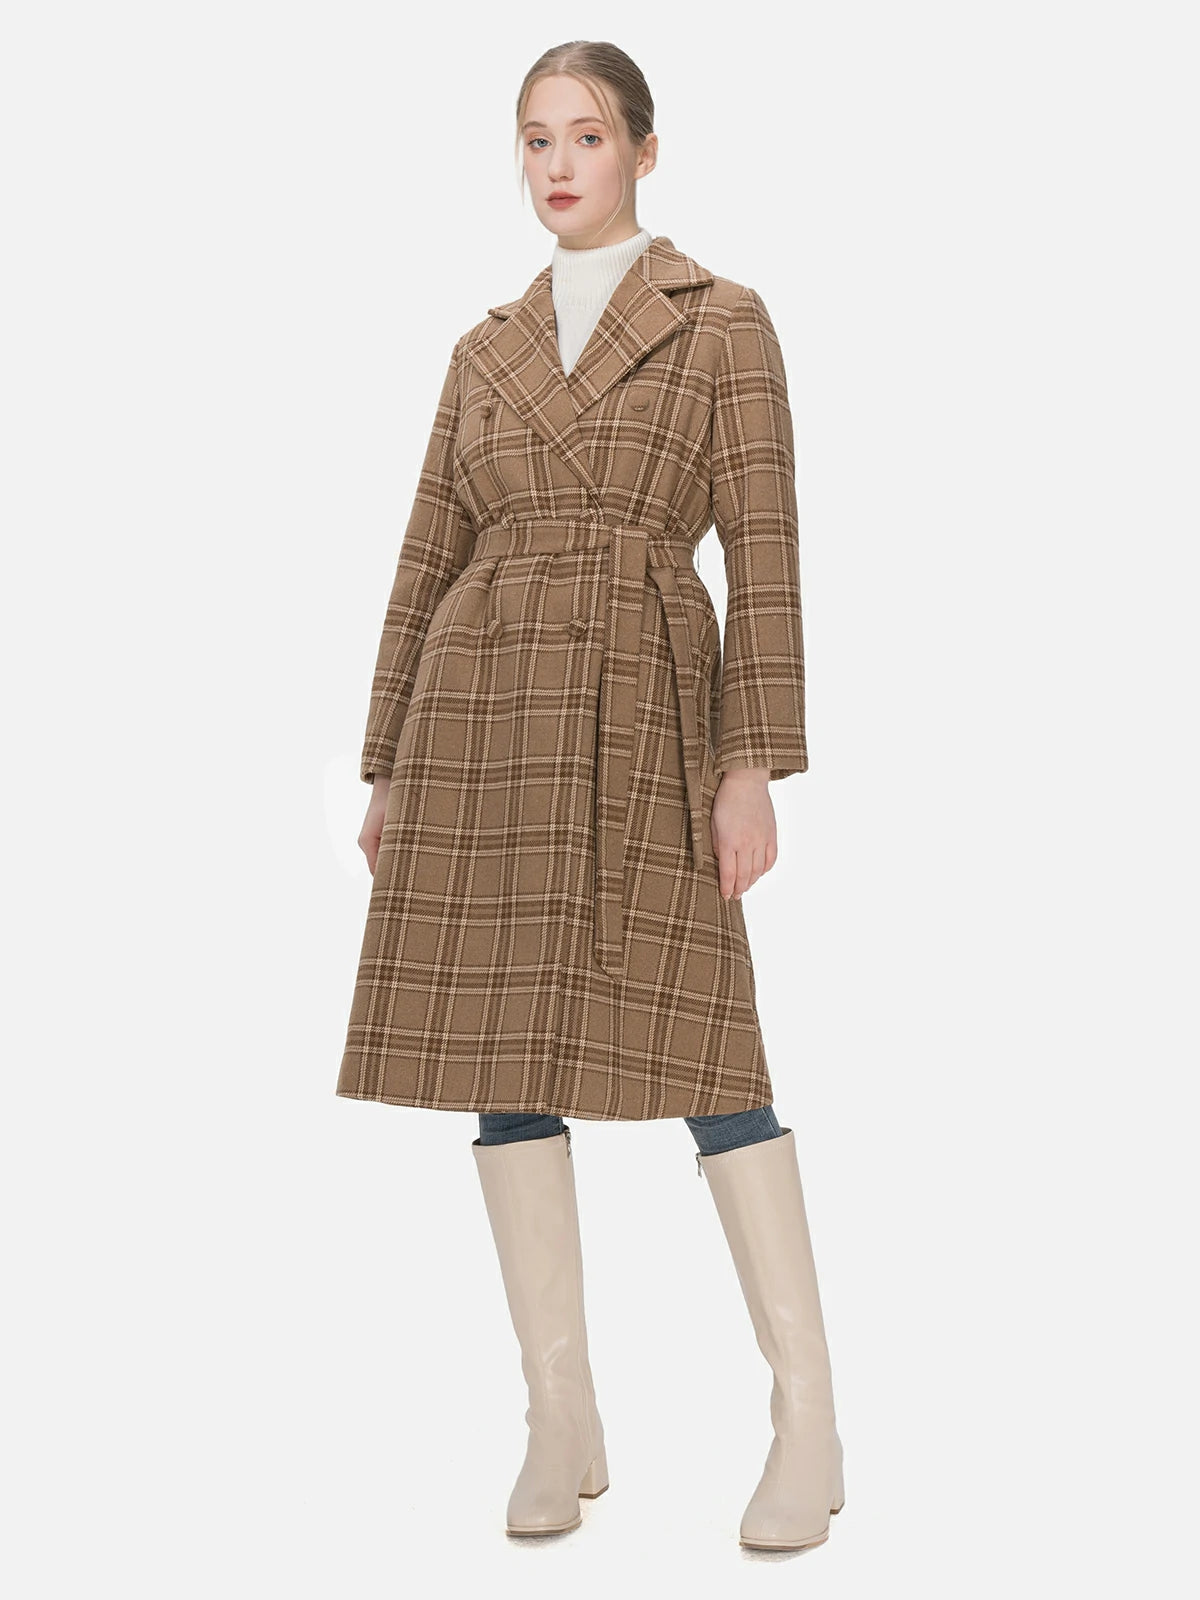 Elevate your winter wardrobe with this classic and contemporary brown double-breasted coat, featuring a flat lapel design, belted style, and a checkered pattern for a perfect blend of elegance and fashion.